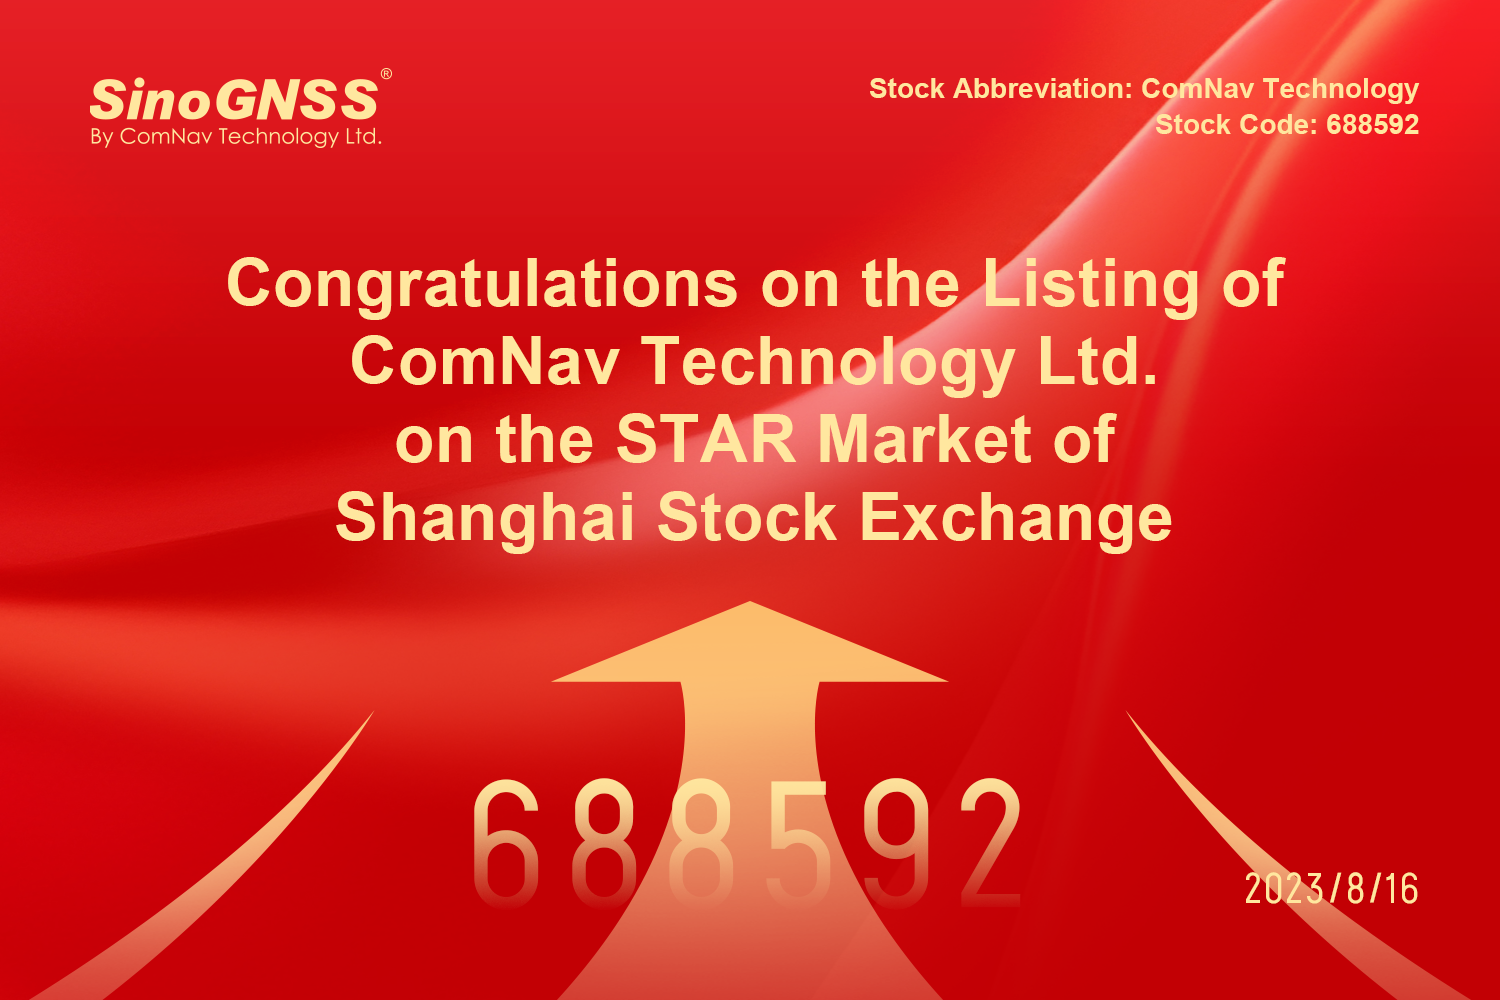 Congratulations on the Listing of ComNav Technology Ltd. on the STAR Market of Shanghai Stock Exchange